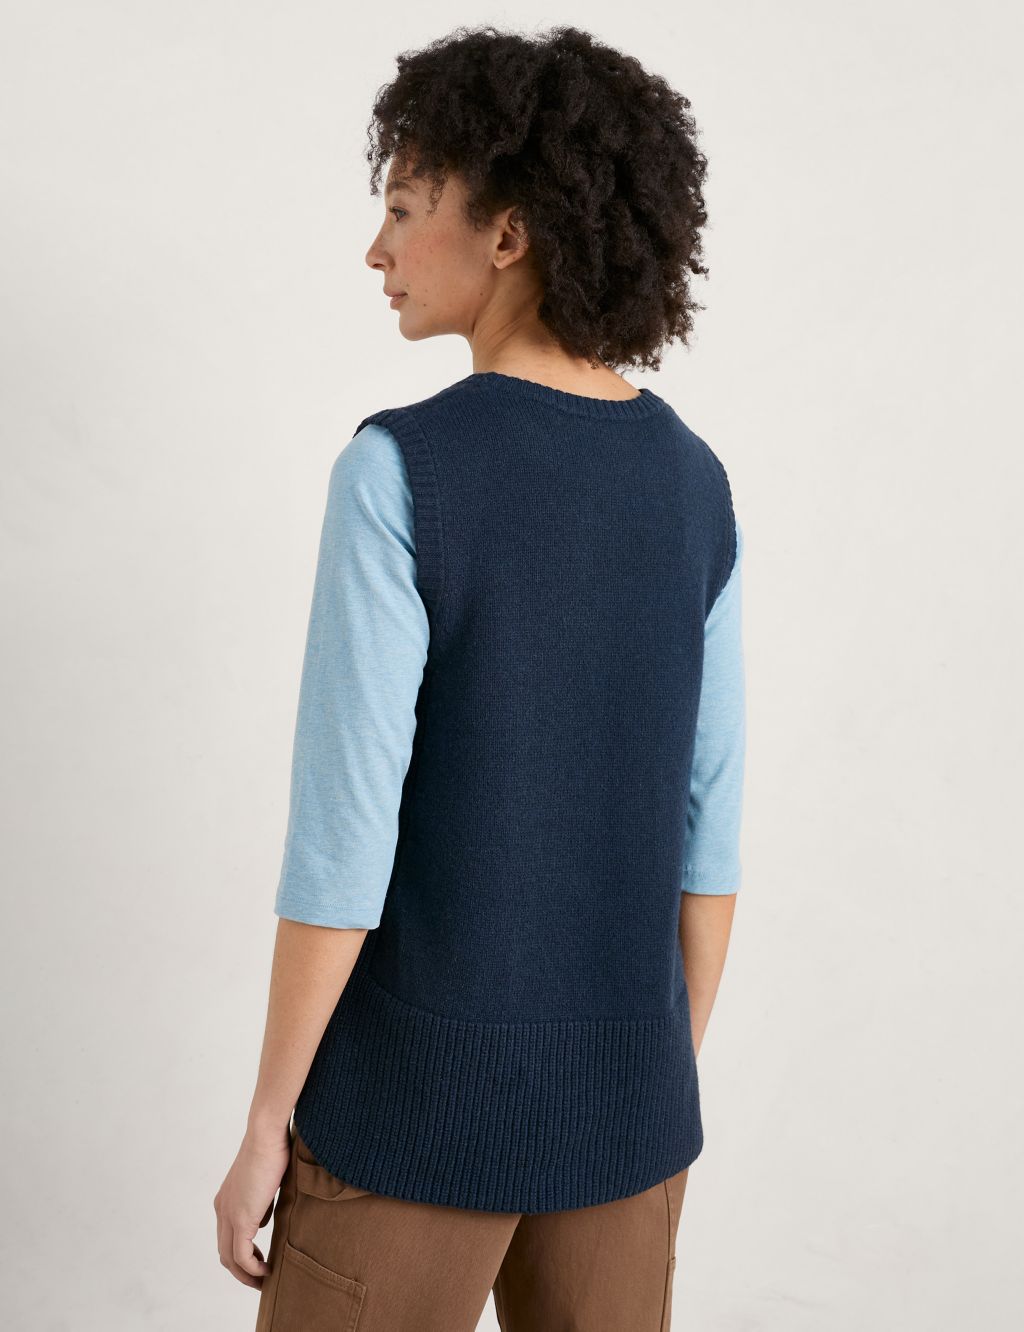 Merino Wool Rich Crew Neck Knitted Top image 4